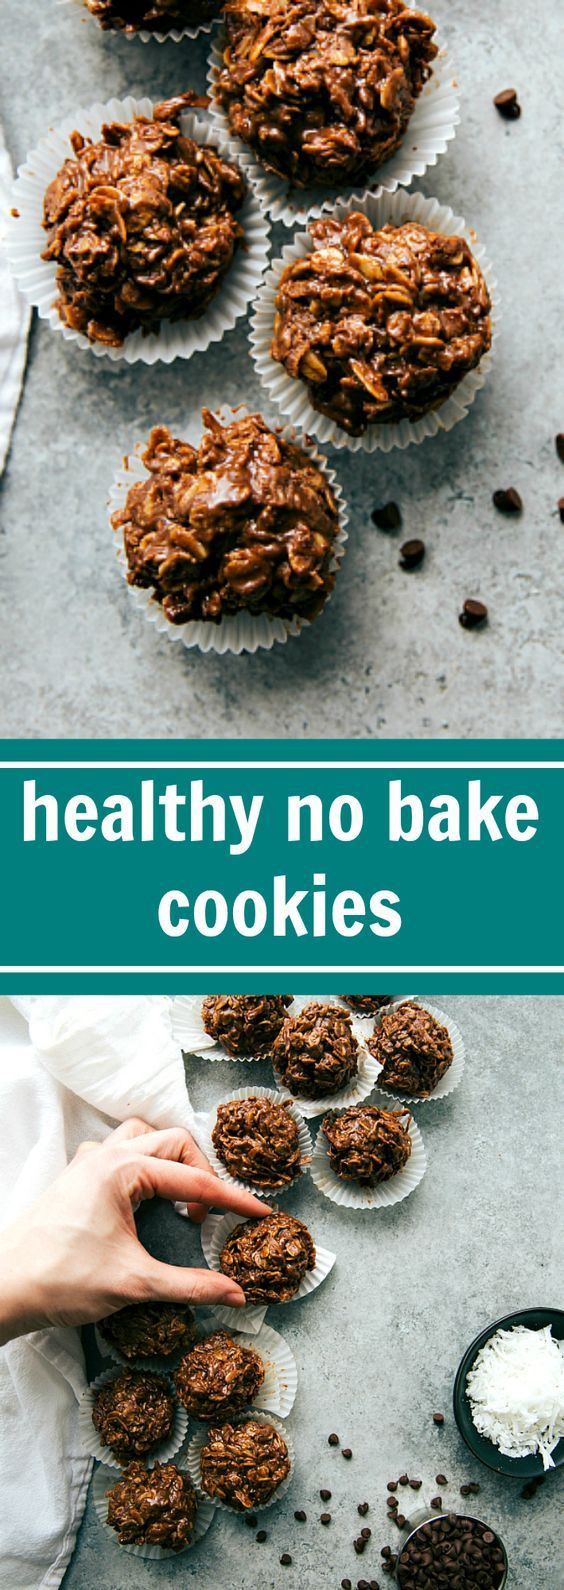 Healthy No Bake Cookies Without Sugar
 1000 images about Healthier Desserts on Pinterest